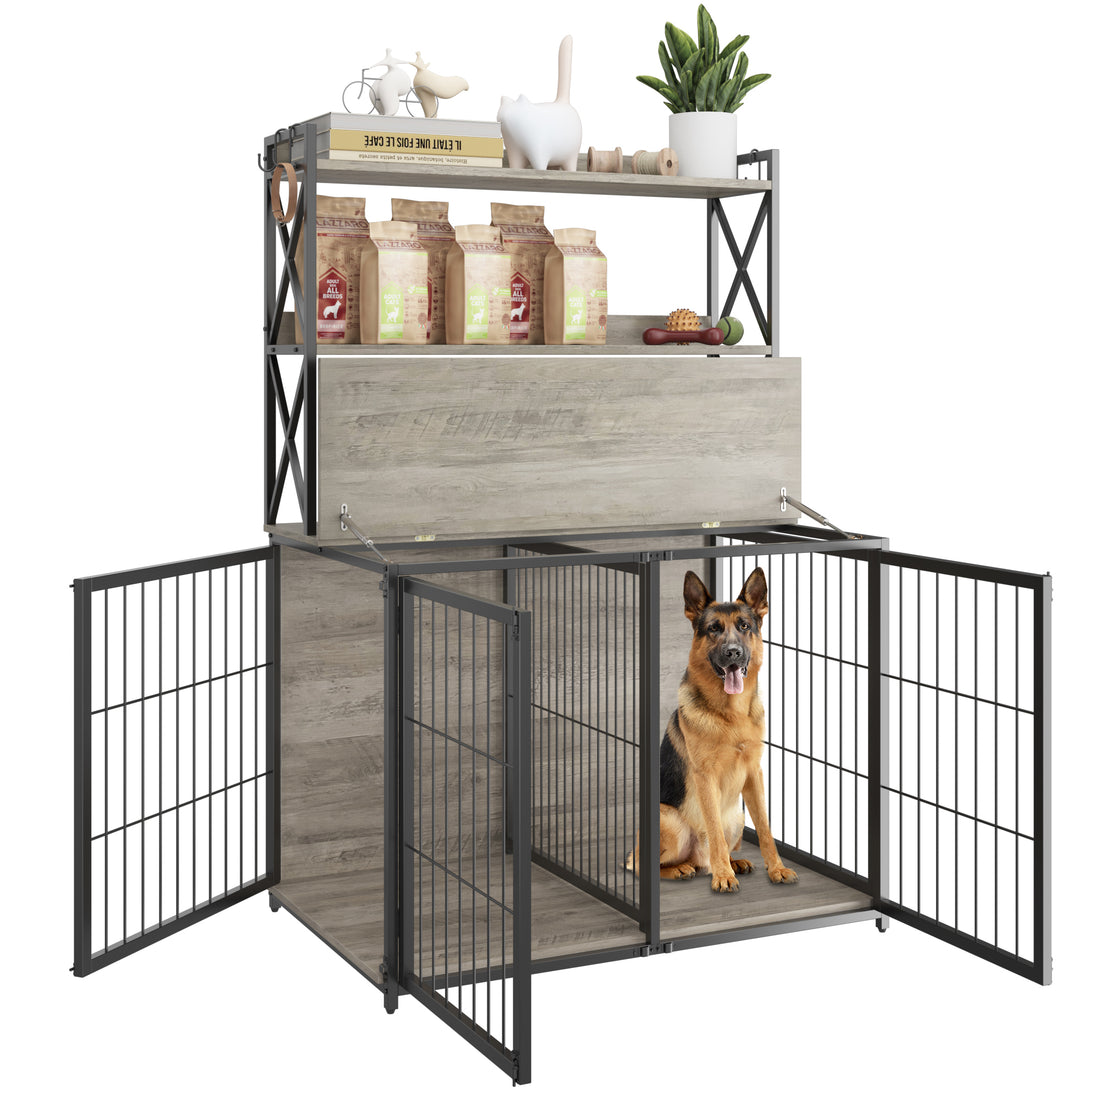 Dog Crate Furniture,Wooden Dog Crate End Table with Flip Top and Movable Divider,42.5 Inch Dog Cage with Storage Shelves,Large Dog Kennel Indoor Furniture with 3 Doors,42.5"L*27.1"W*63.7"H,Grey